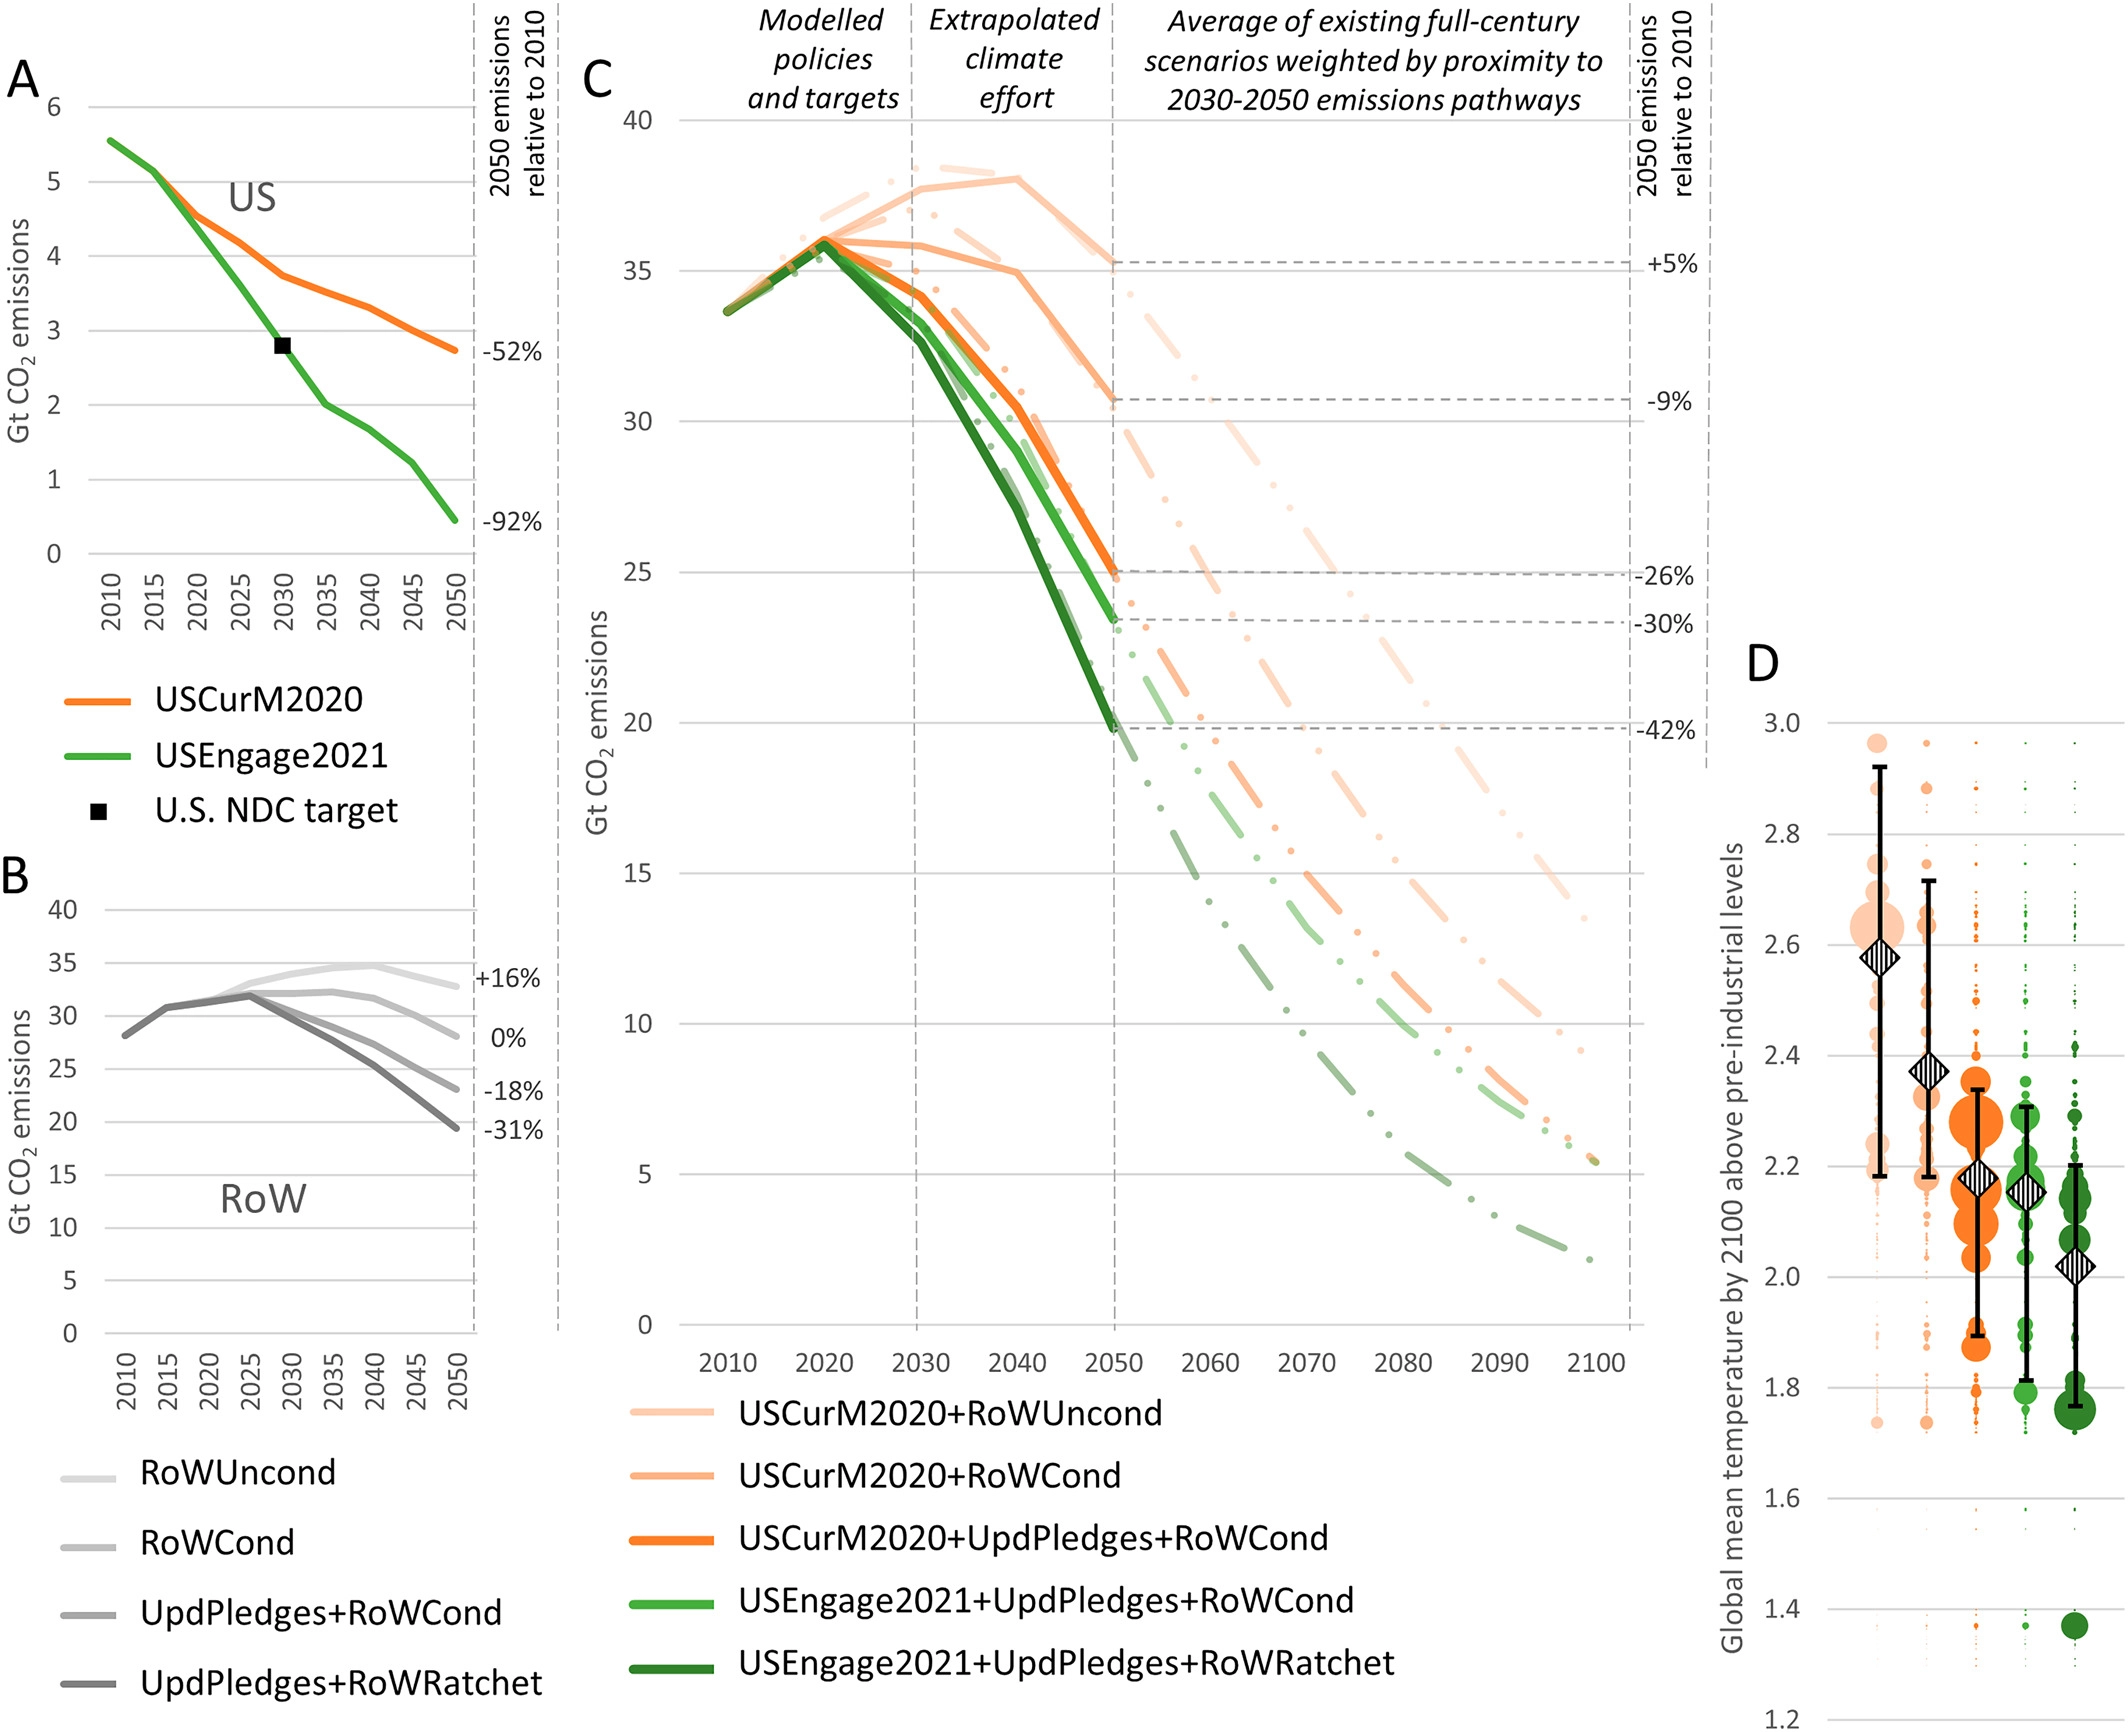 Panel A shows the CO2 emissions of two U.S. scenarios, panel B the CO2 emissions of four RoW scenario (See Section 3 in the SM for more detailed scenario outcomes). Panel C shows the combined scenarios until 2050 (see Table 1 for scenario definitions) and an average of existing full-century scenarios, weighted by their proximity to the modeled 2030–2050 CO2 emission pathways. Panel D shows the range of end-of-century temperature outcomes from those existing scenarios, where the bubble size reflects the probability of each temperature outcome (based on the proximity to the 2030–2050 emission pathways), the striped rhombuses the weighted average of temperature outcomes, and the error bars representing the 90% confidence interval of all scenarios within a 3-Gt average range to the modeled 2030–2050 emission pathways